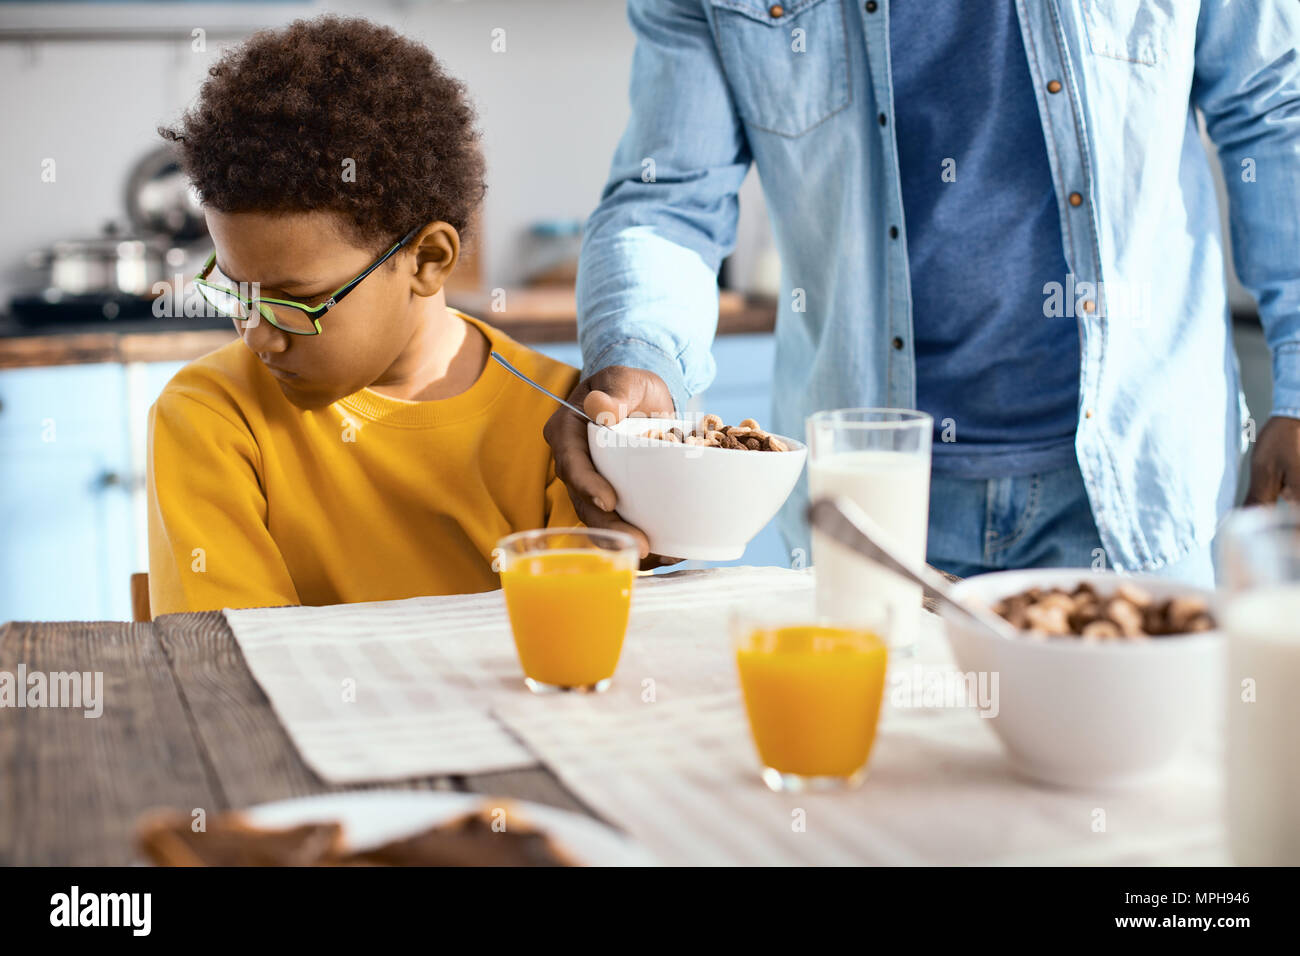 Curly-haired pre-teen boy not wanting to eat cereals Stock Photo